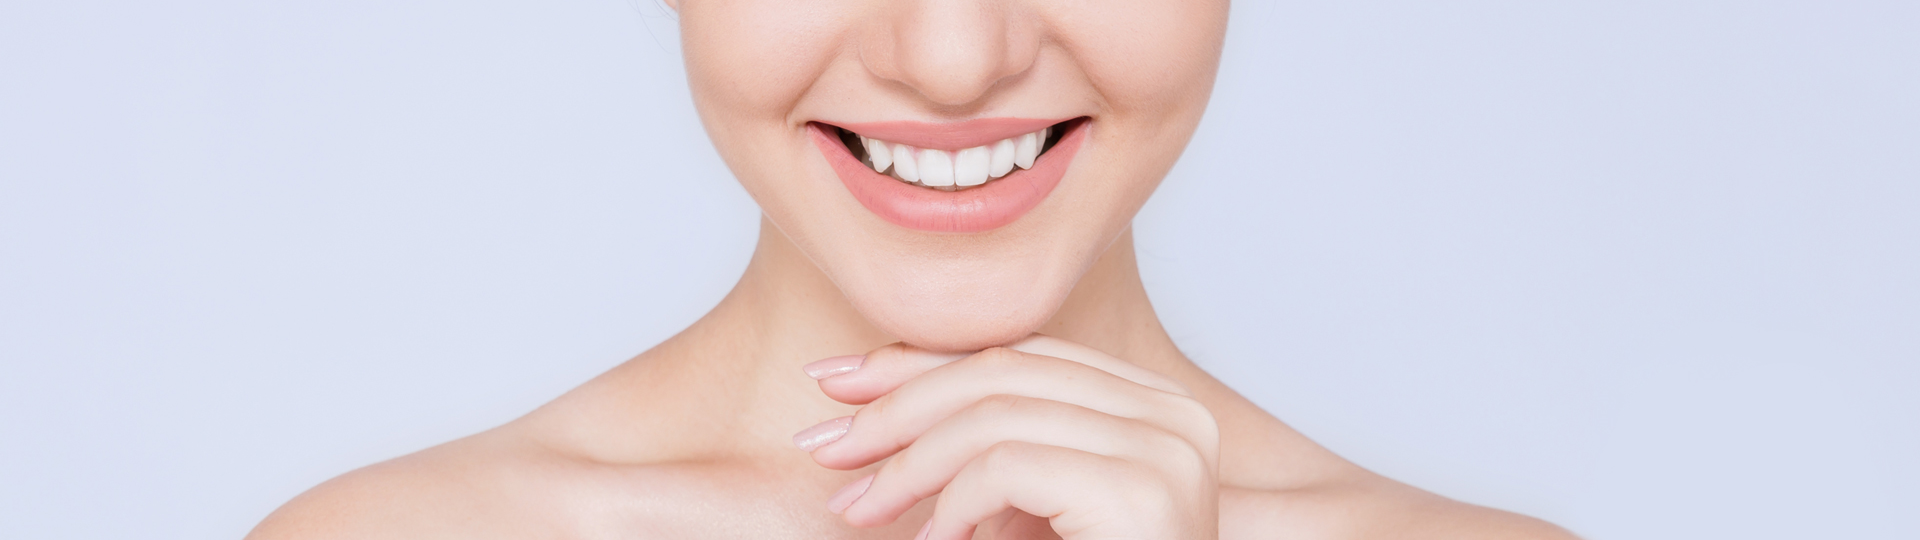 Are Take-Home Teeth Whitening Kits Good For Me?